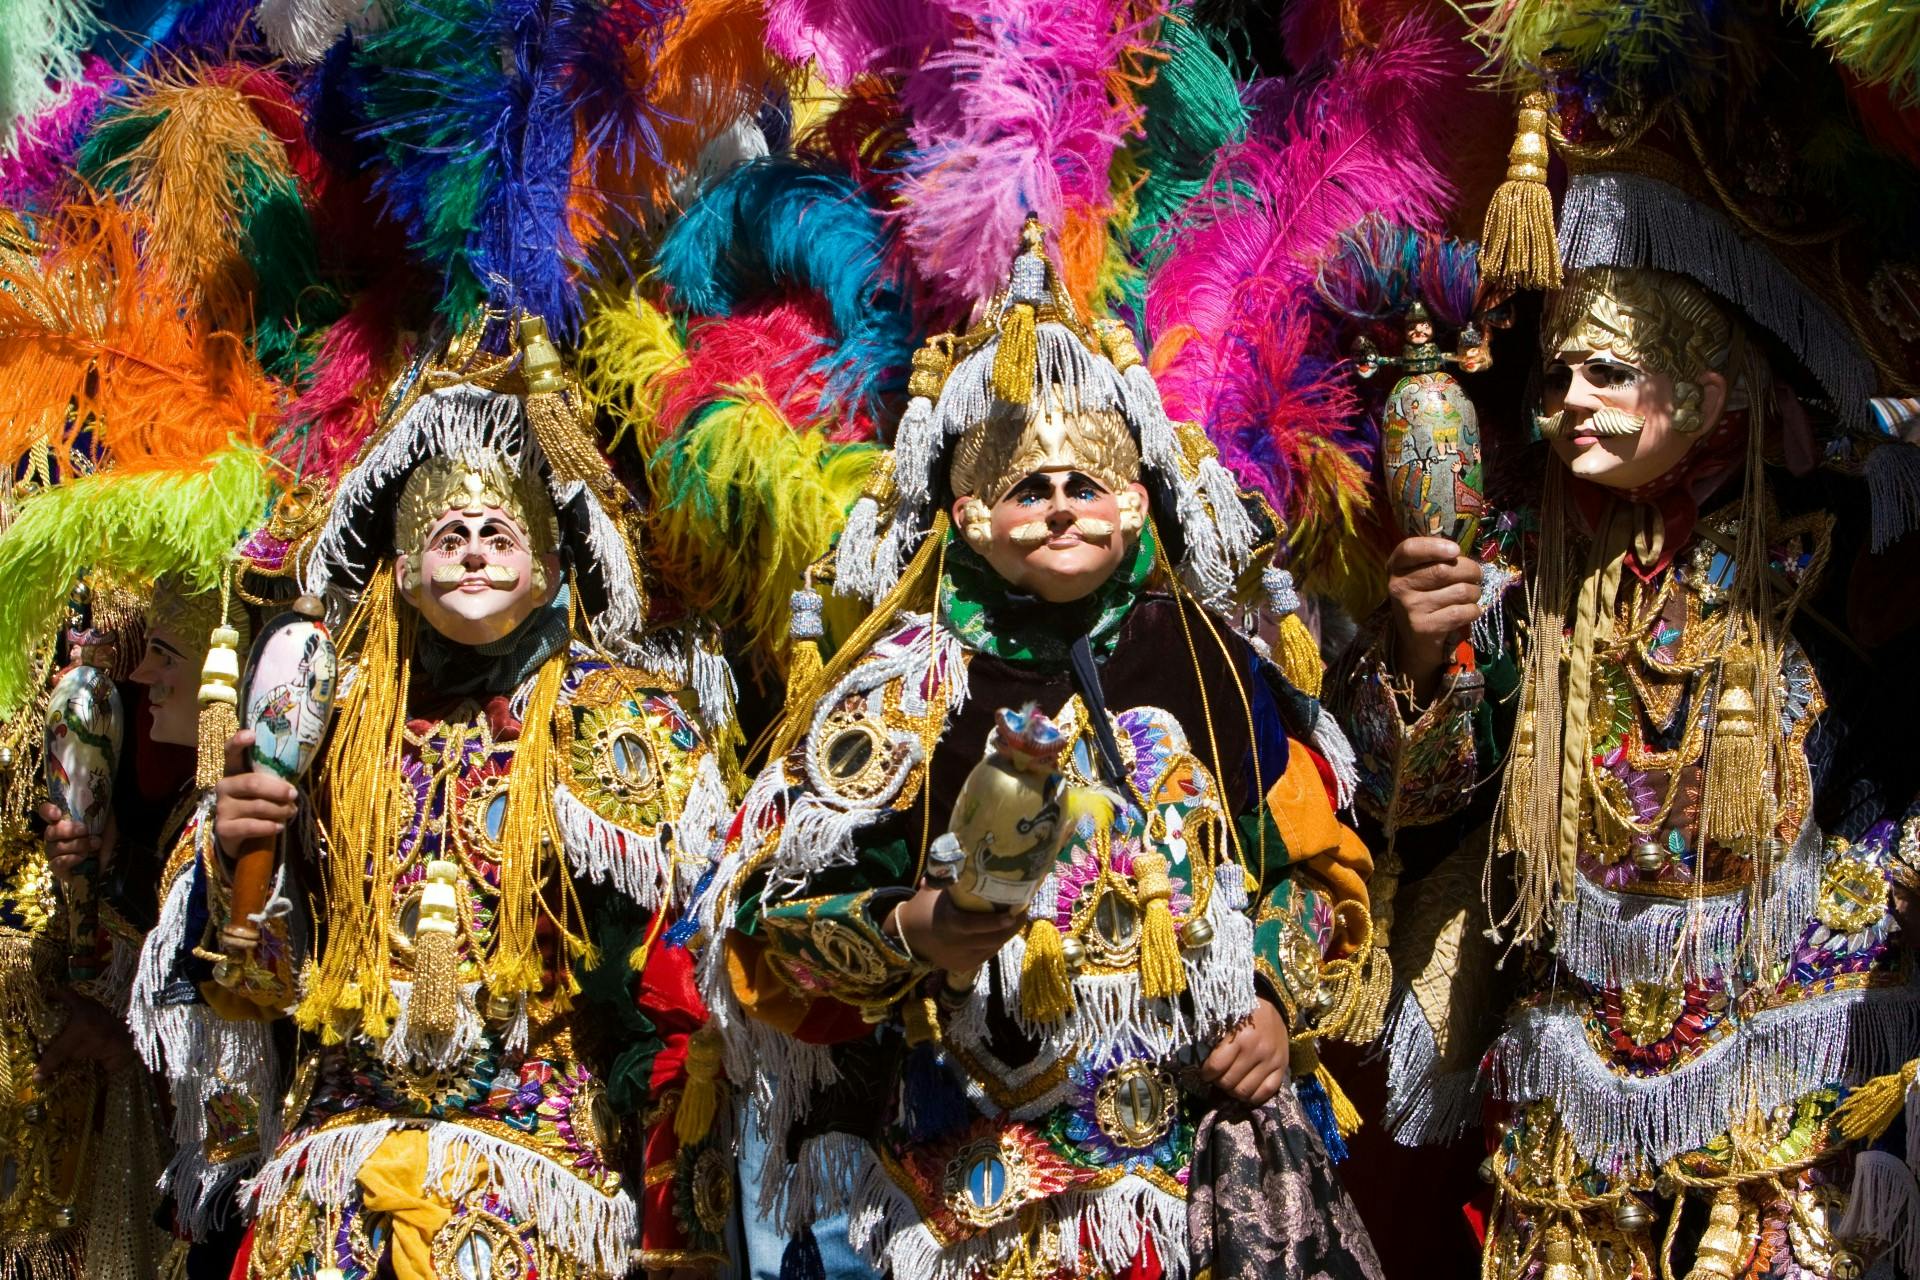 The Locals of small highland town of Chichicastenango dress up to celebrate the Festa of San Tomas